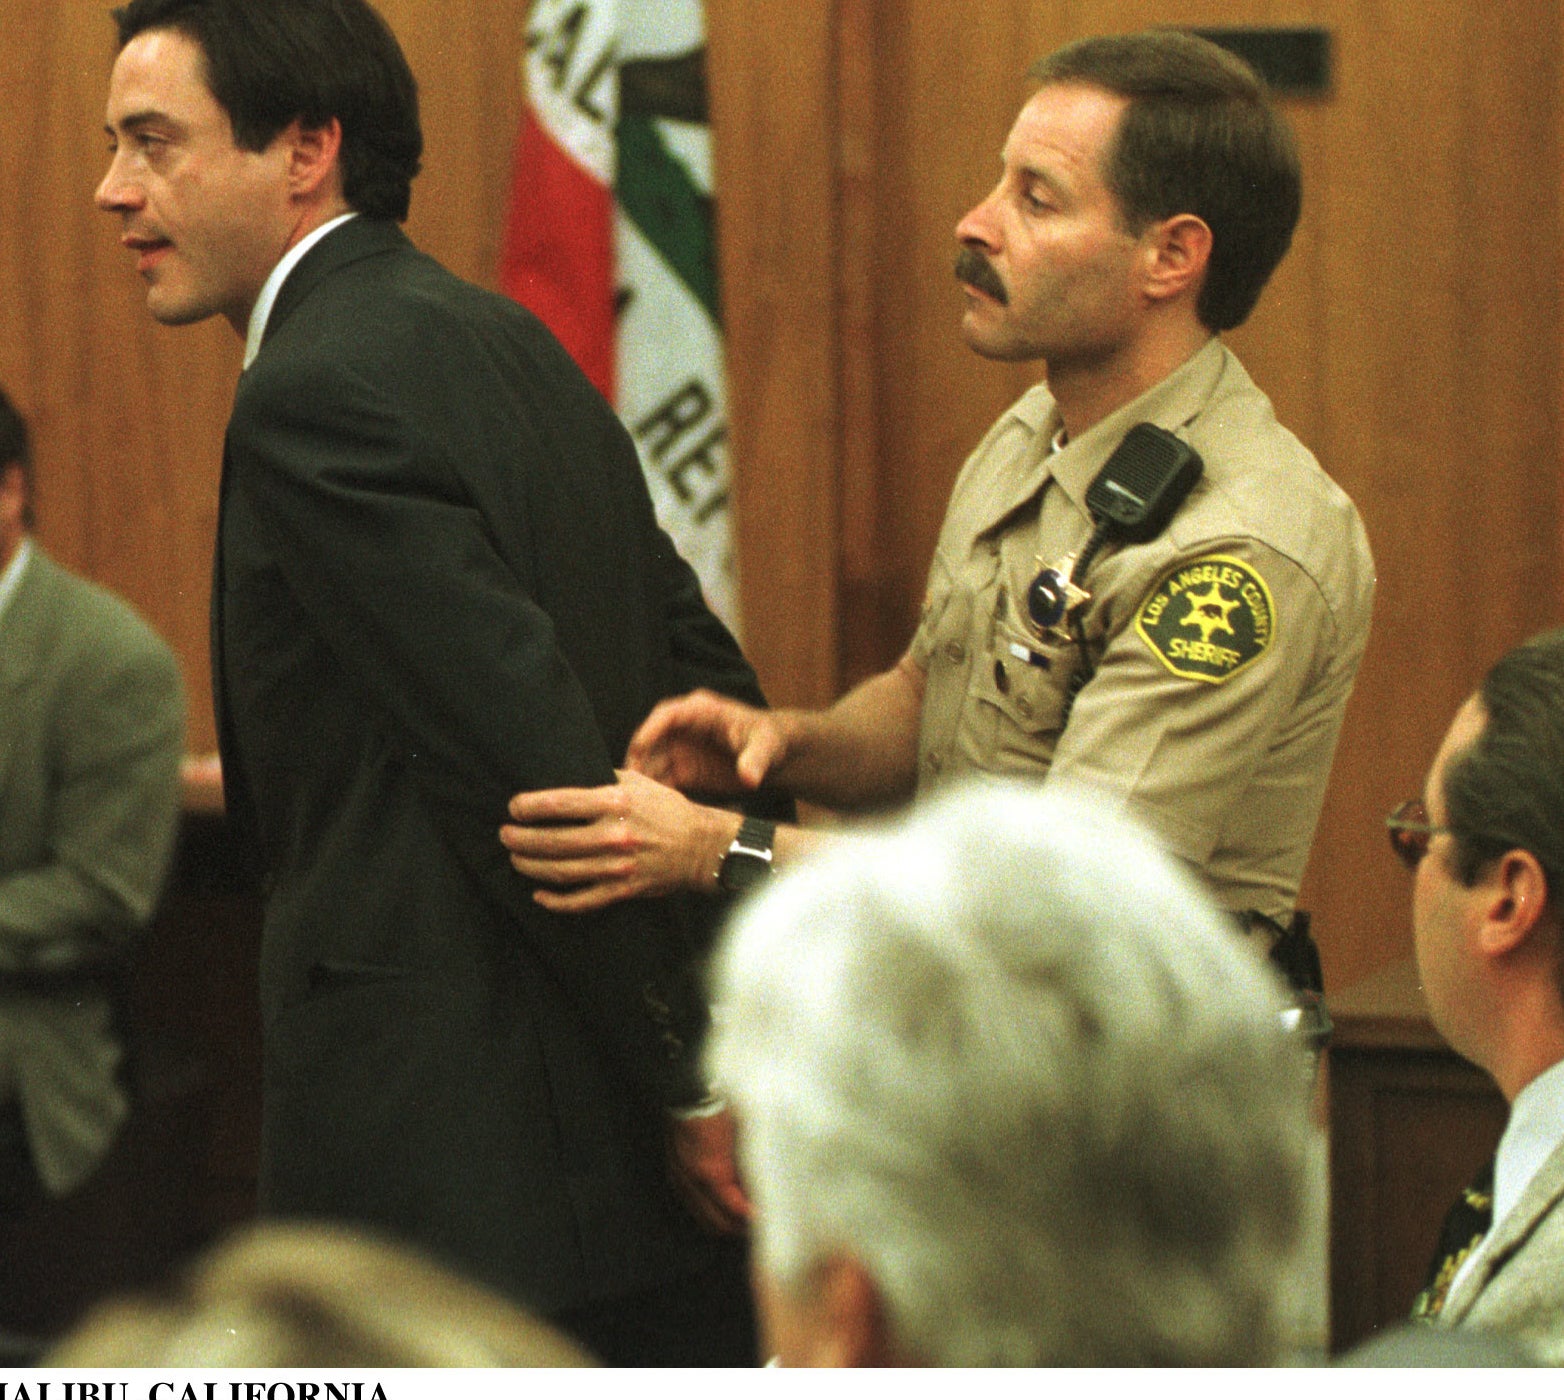 Robert Downey Jr. is taken into custody after the judge ordered him to jail